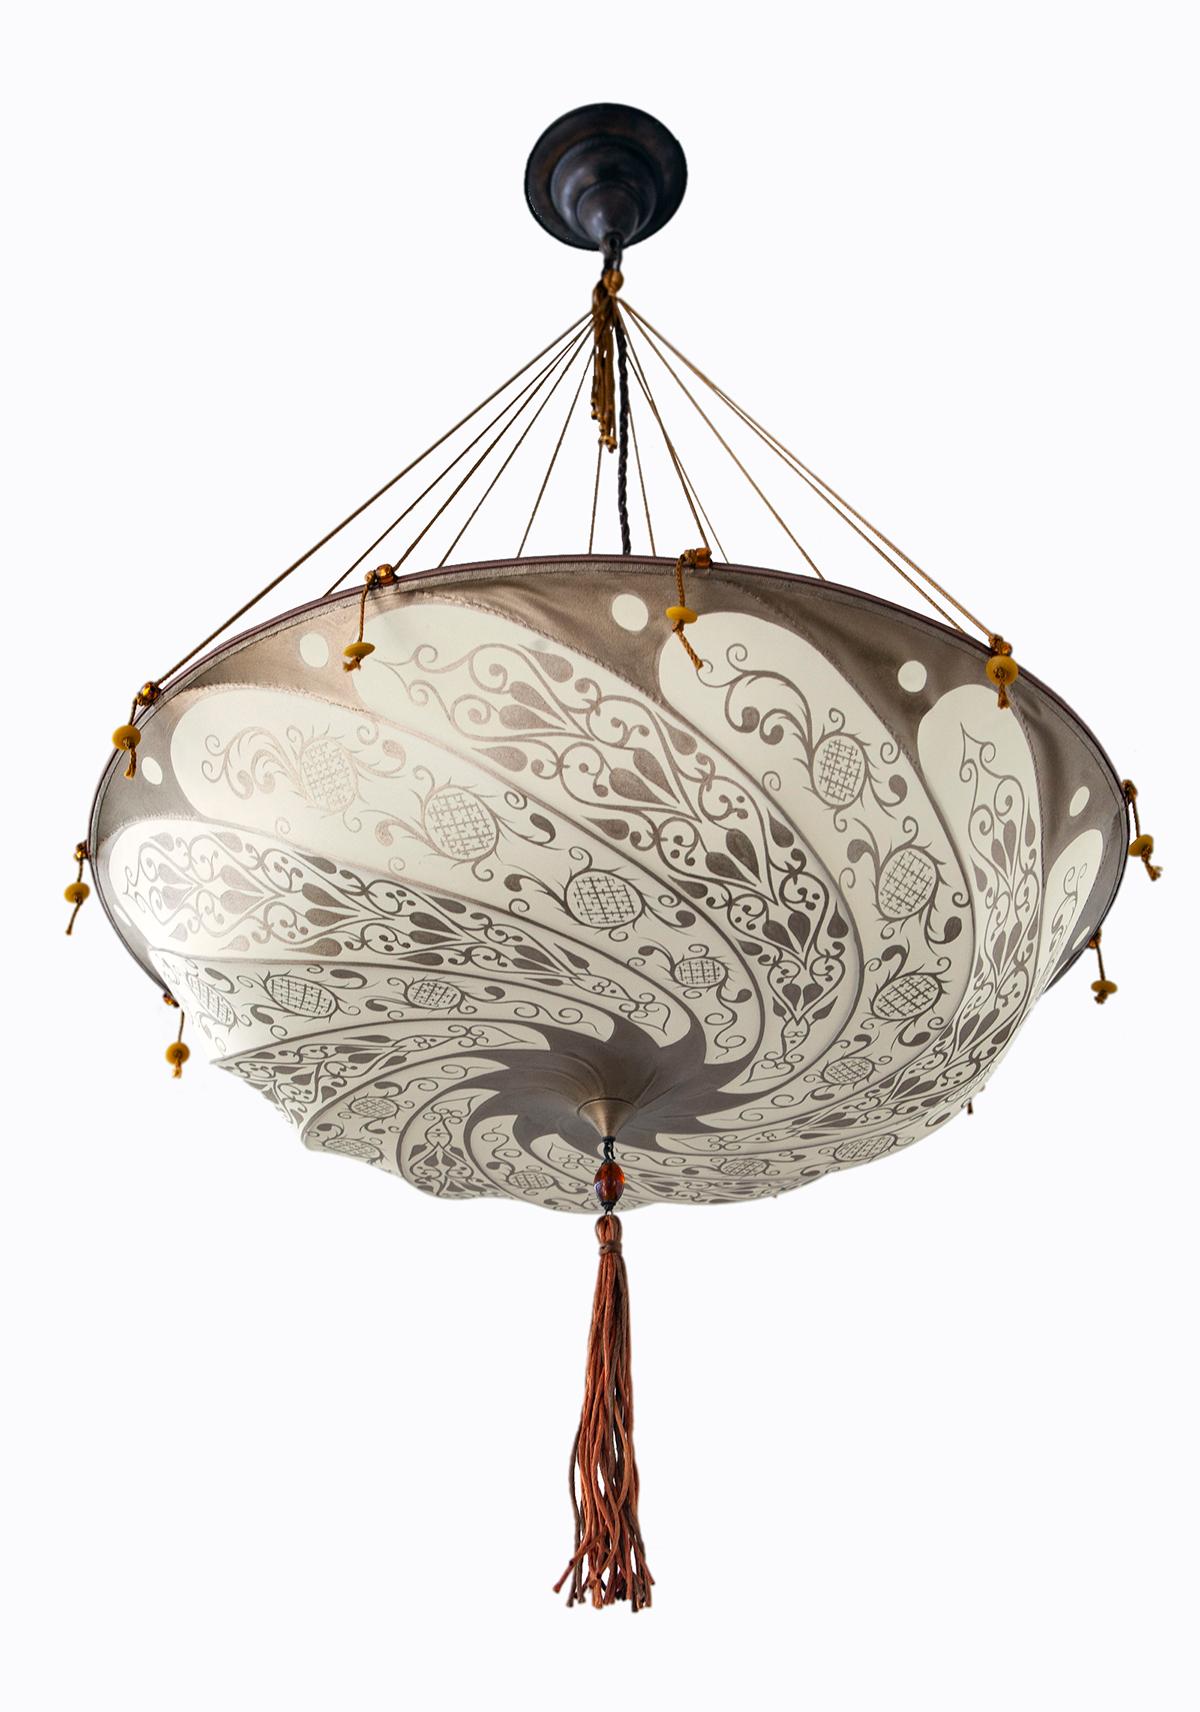 Classic silk Fortuny Scudo Sareceno chandelier with ceiling plate, cords and bead tassel in ivory and pale gold. Murano glass beads decorate each cord. 24” diameter. Excellent condition.
A masterpiece of craftsmanship, this famous silk lamp has